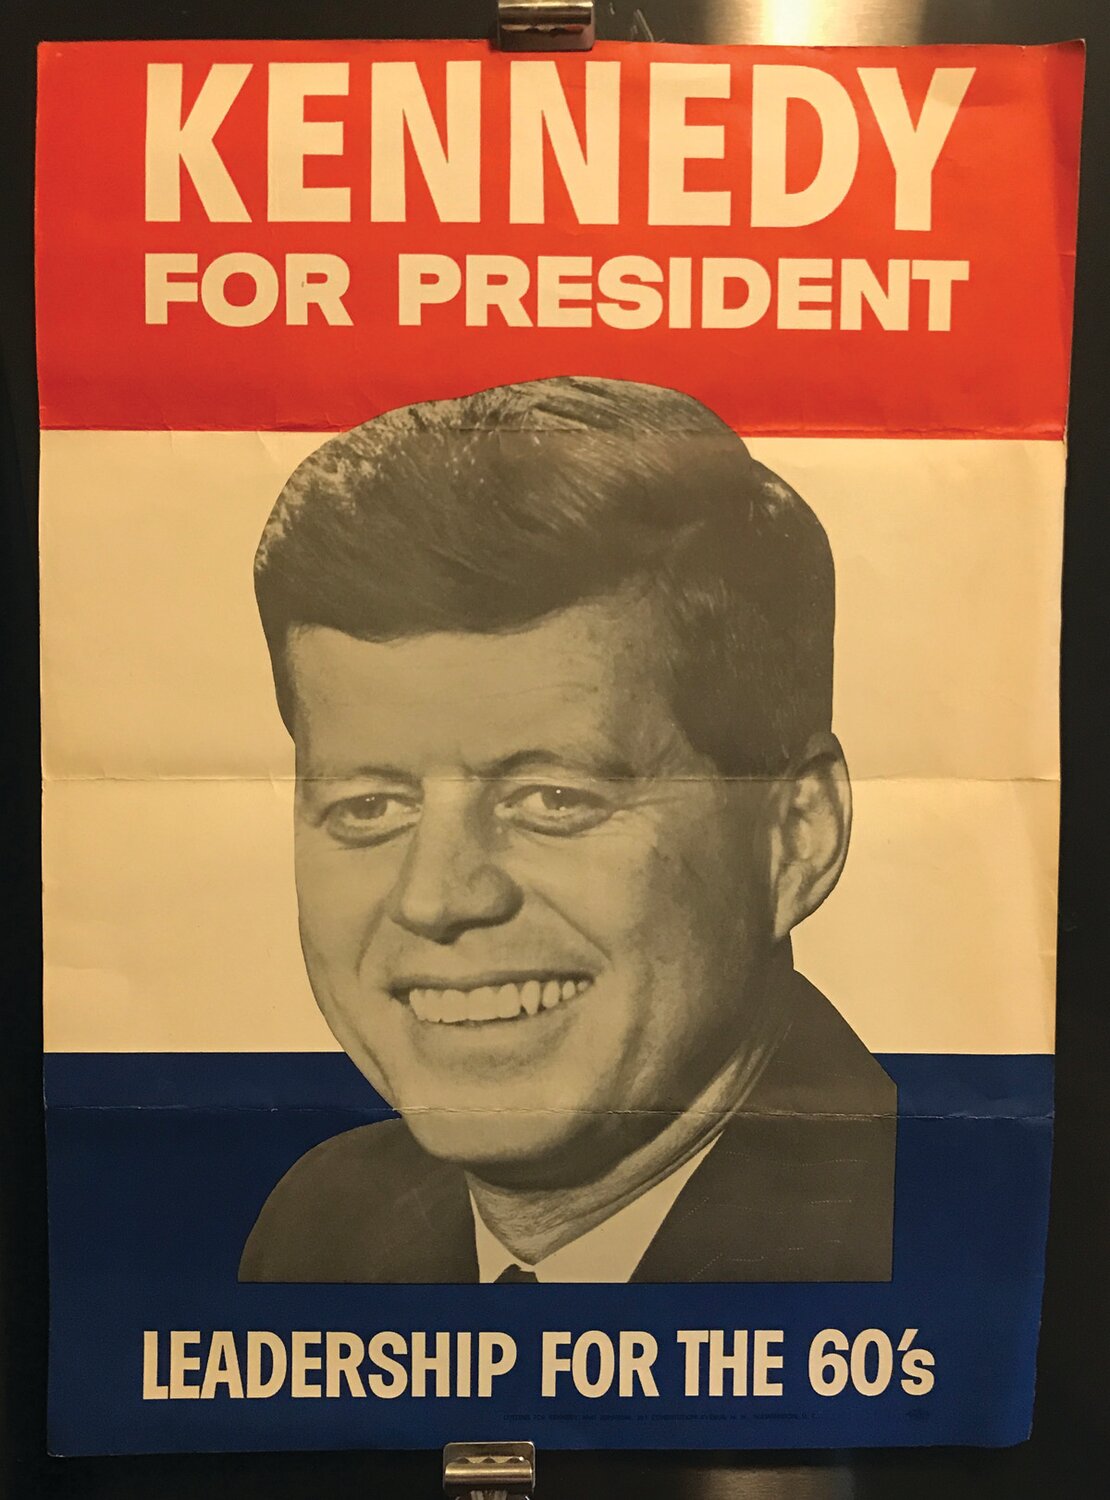 The 1960 presidential campaign was groundbreaking for many reasons.